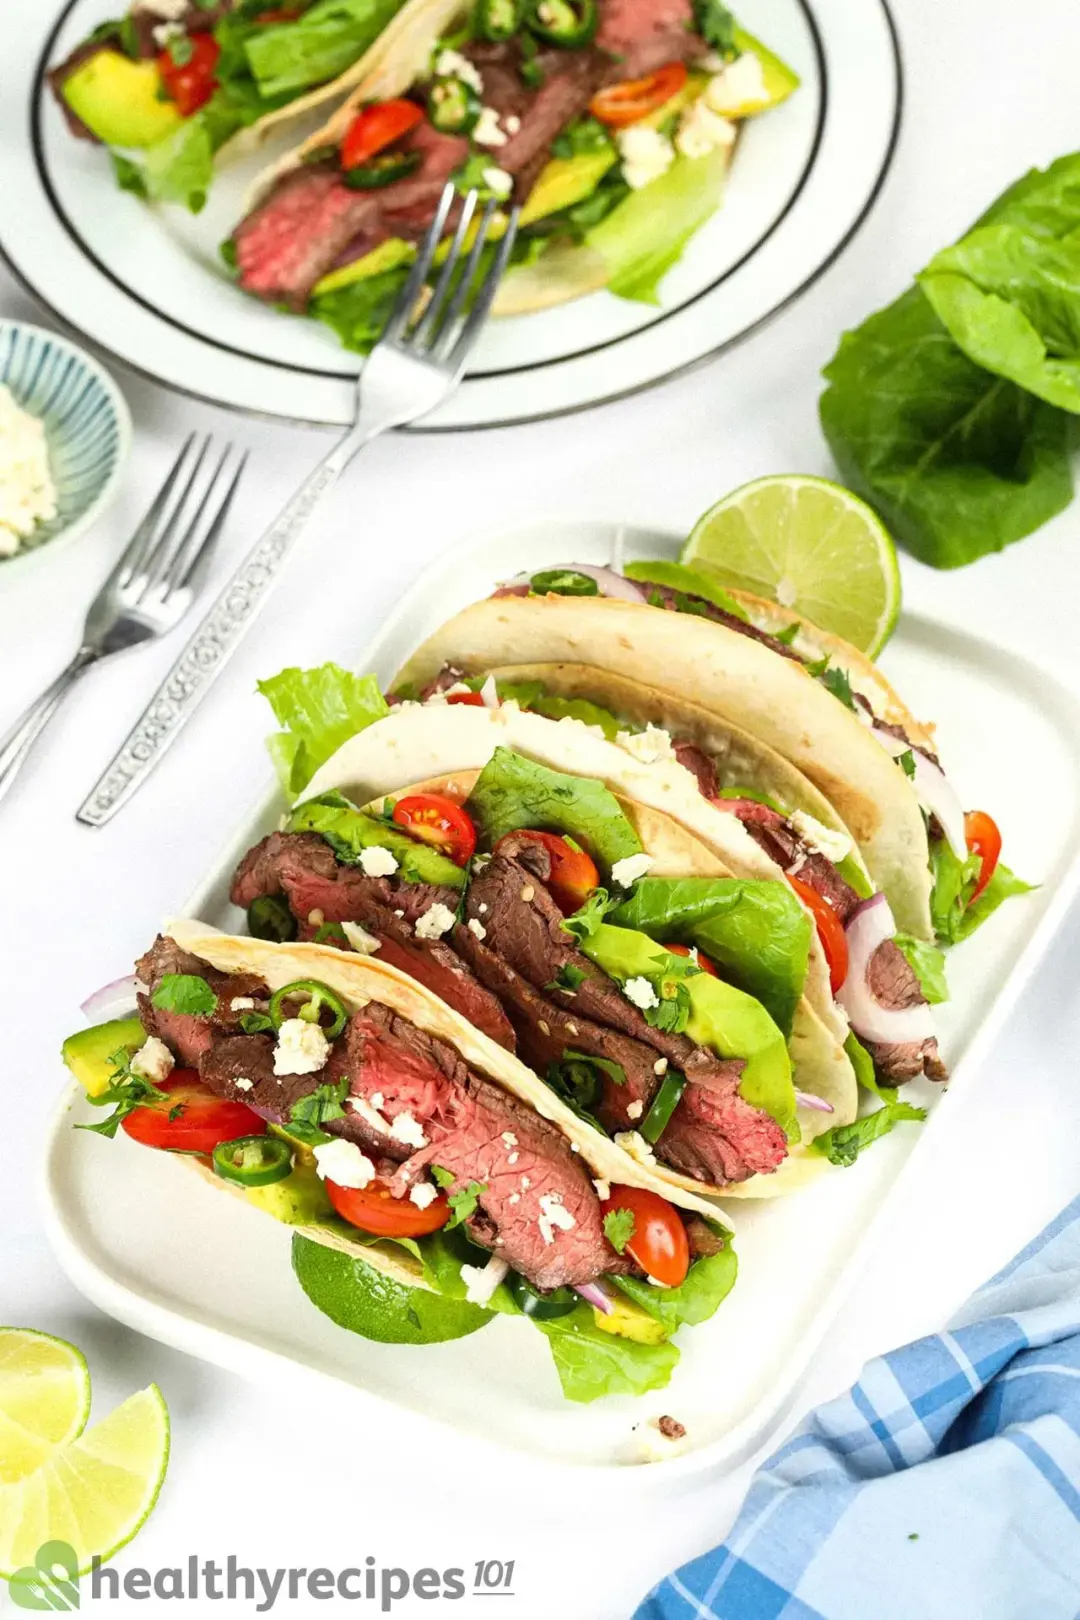 Tips to Make the Perfect Steak for tacos